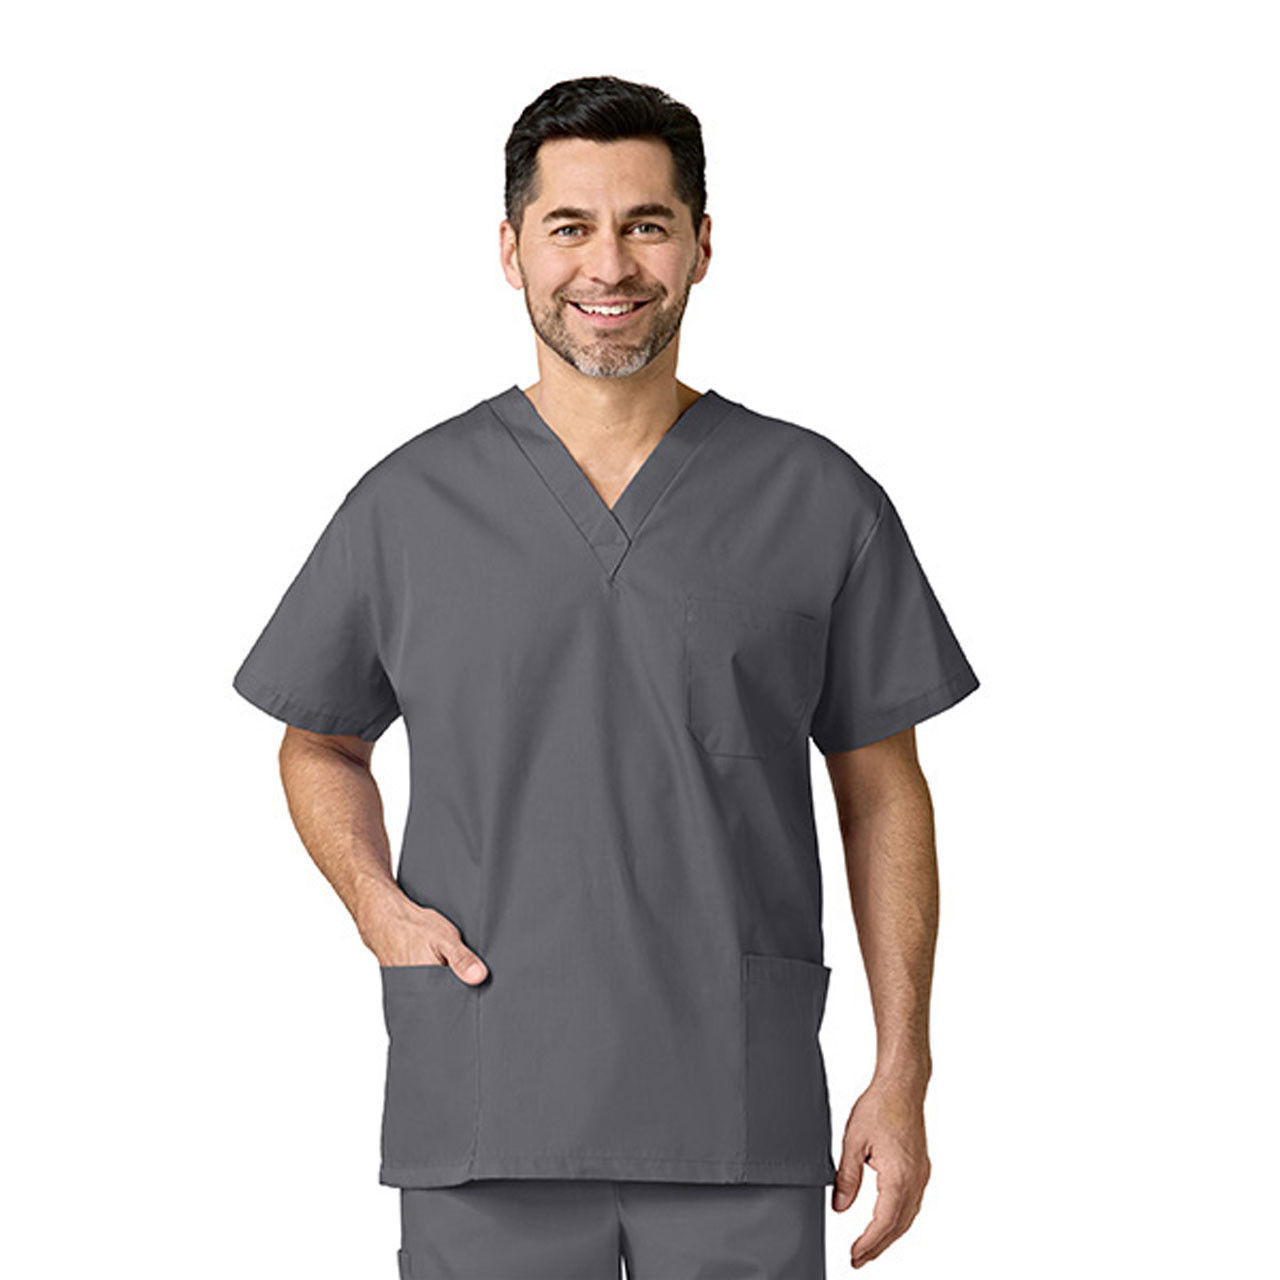 What is the color of the Fashion Seal Scrub Top?